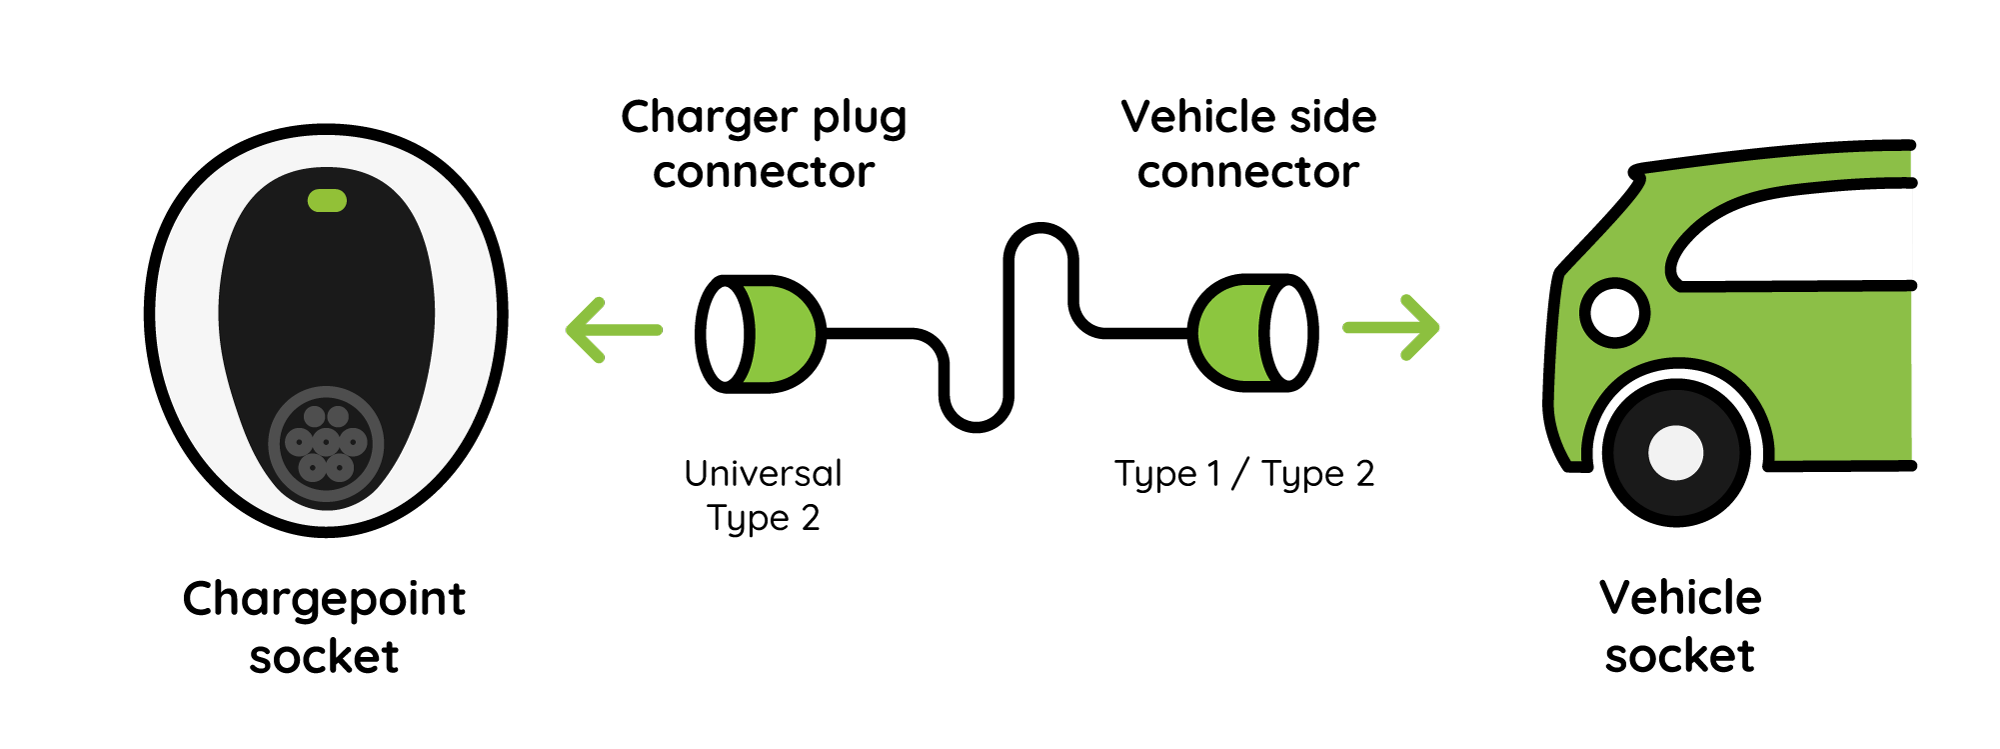 EV Charging Connector Types and Speeds